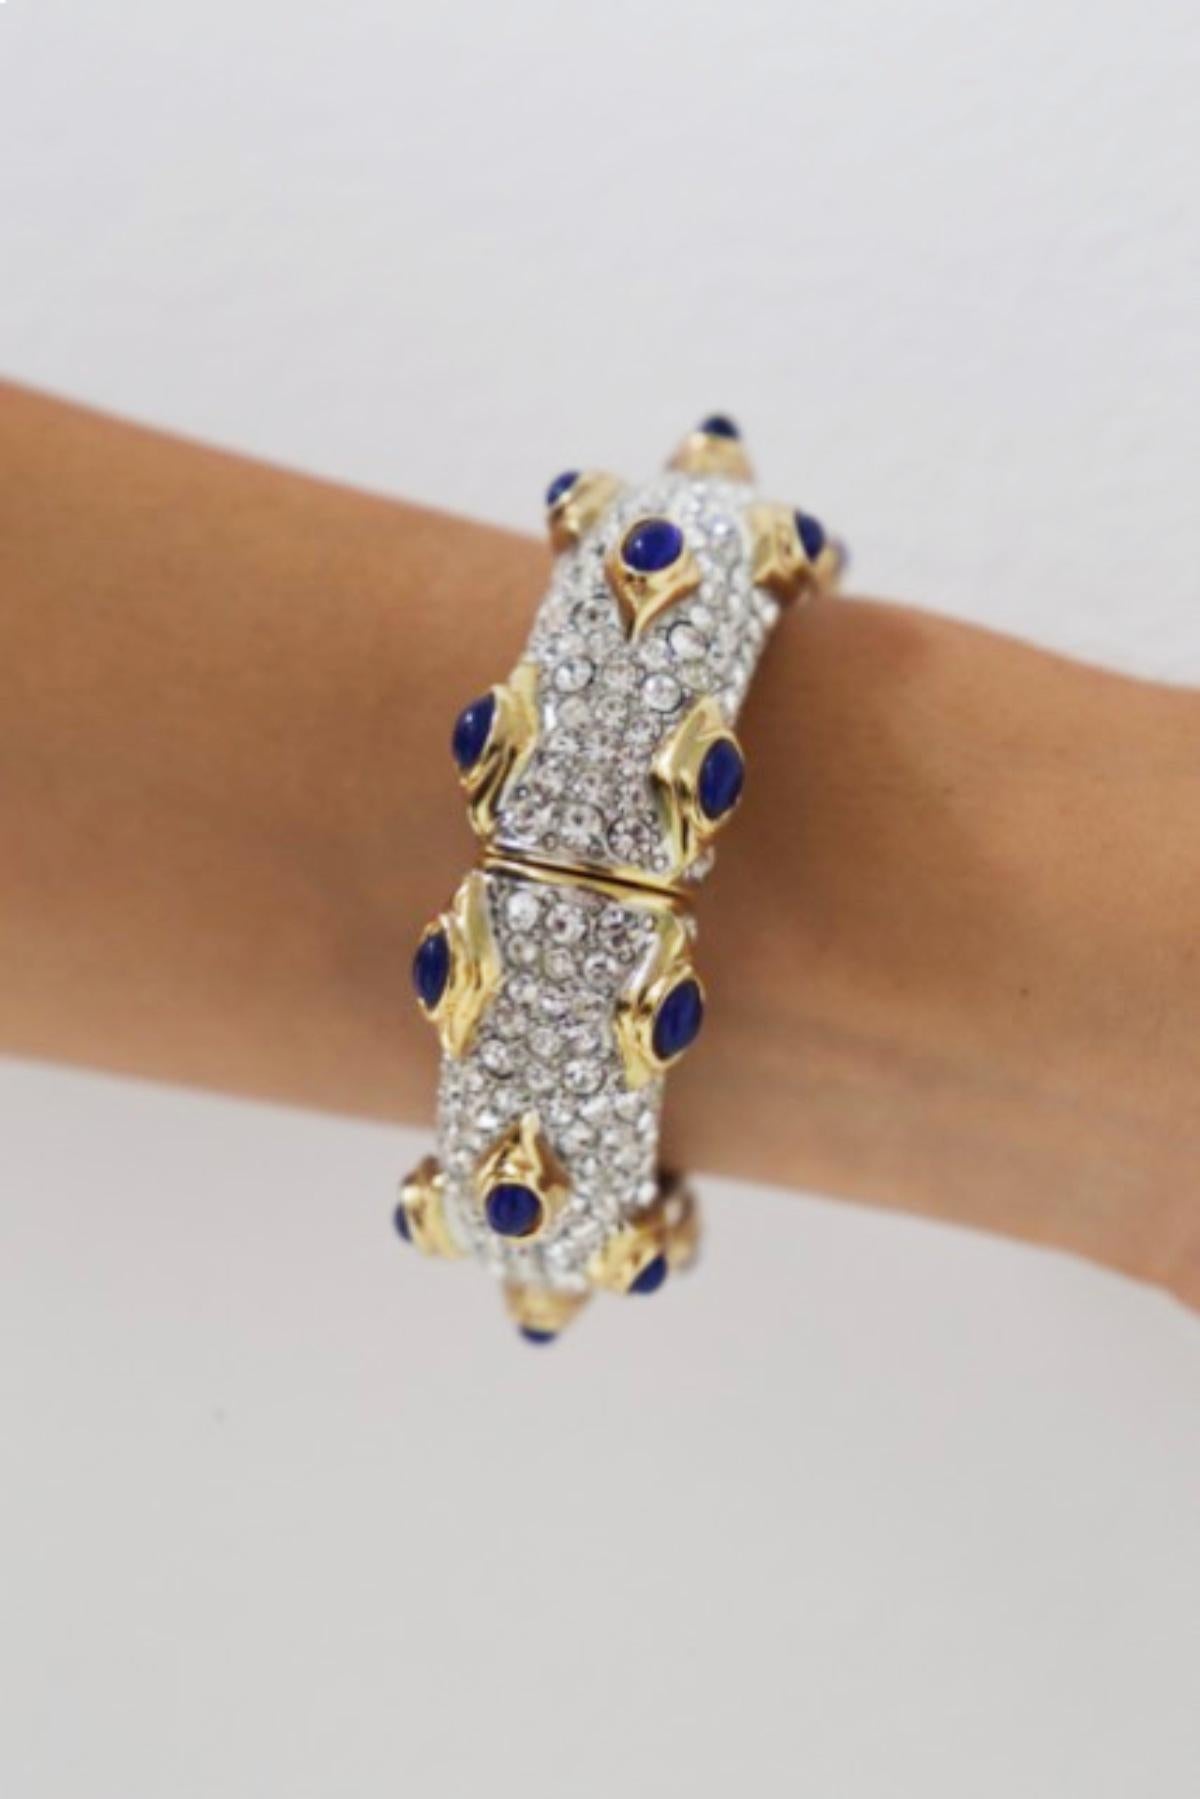 Royal bracelet designed by Kenneth Lane in the 1990s, ORIGINAL BRAND.
The bracelet has a round shape and opens and closes by a magnetic mechanism.
The jewelry is studded with small white cubic zirconia, with ocean blue stones set in the metallic